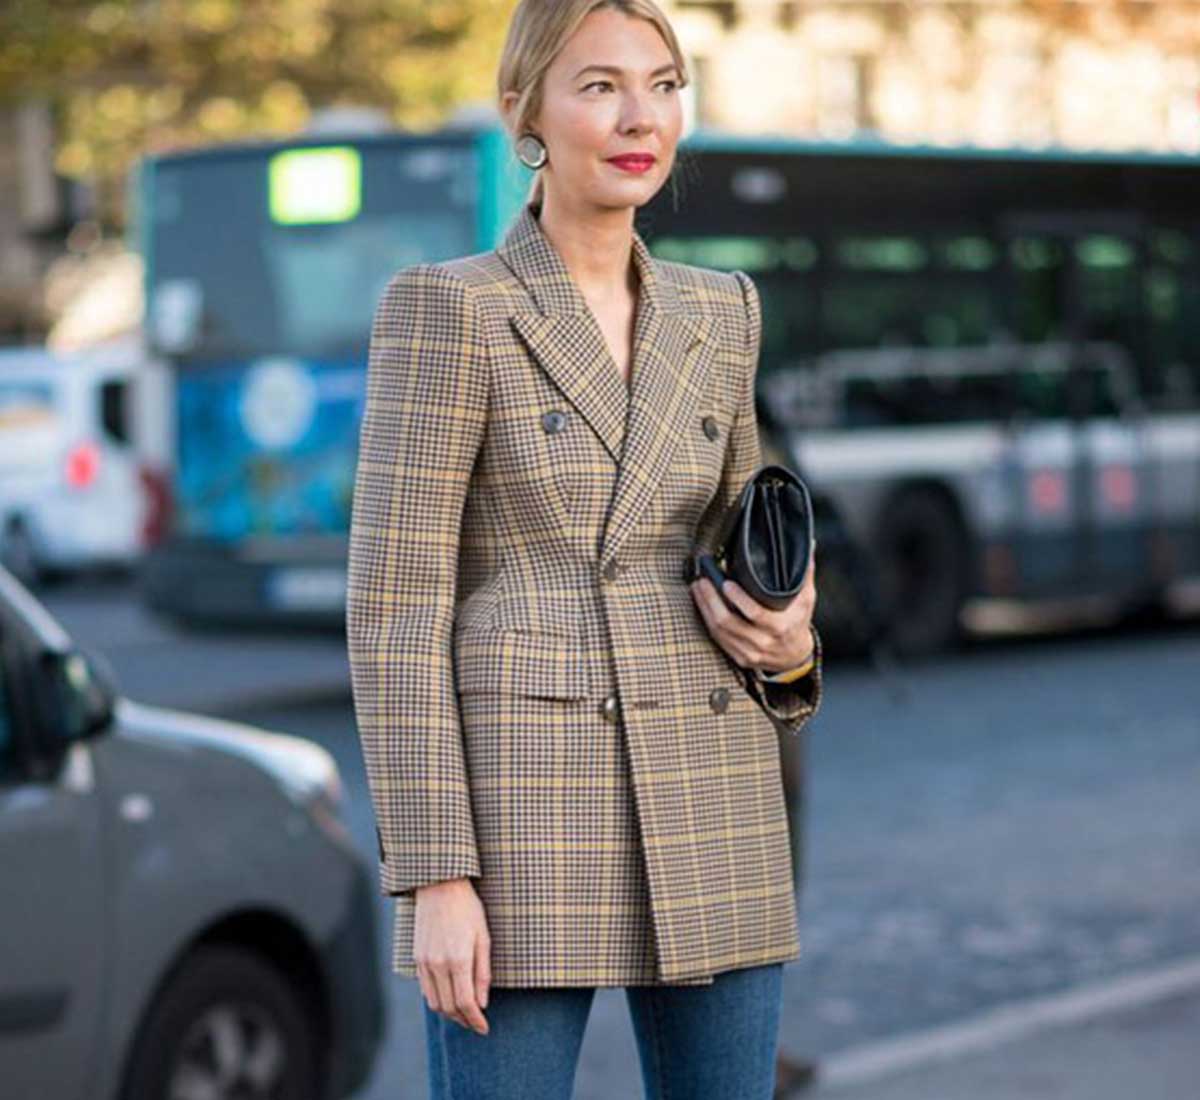 How To Achieve The Parisian Look